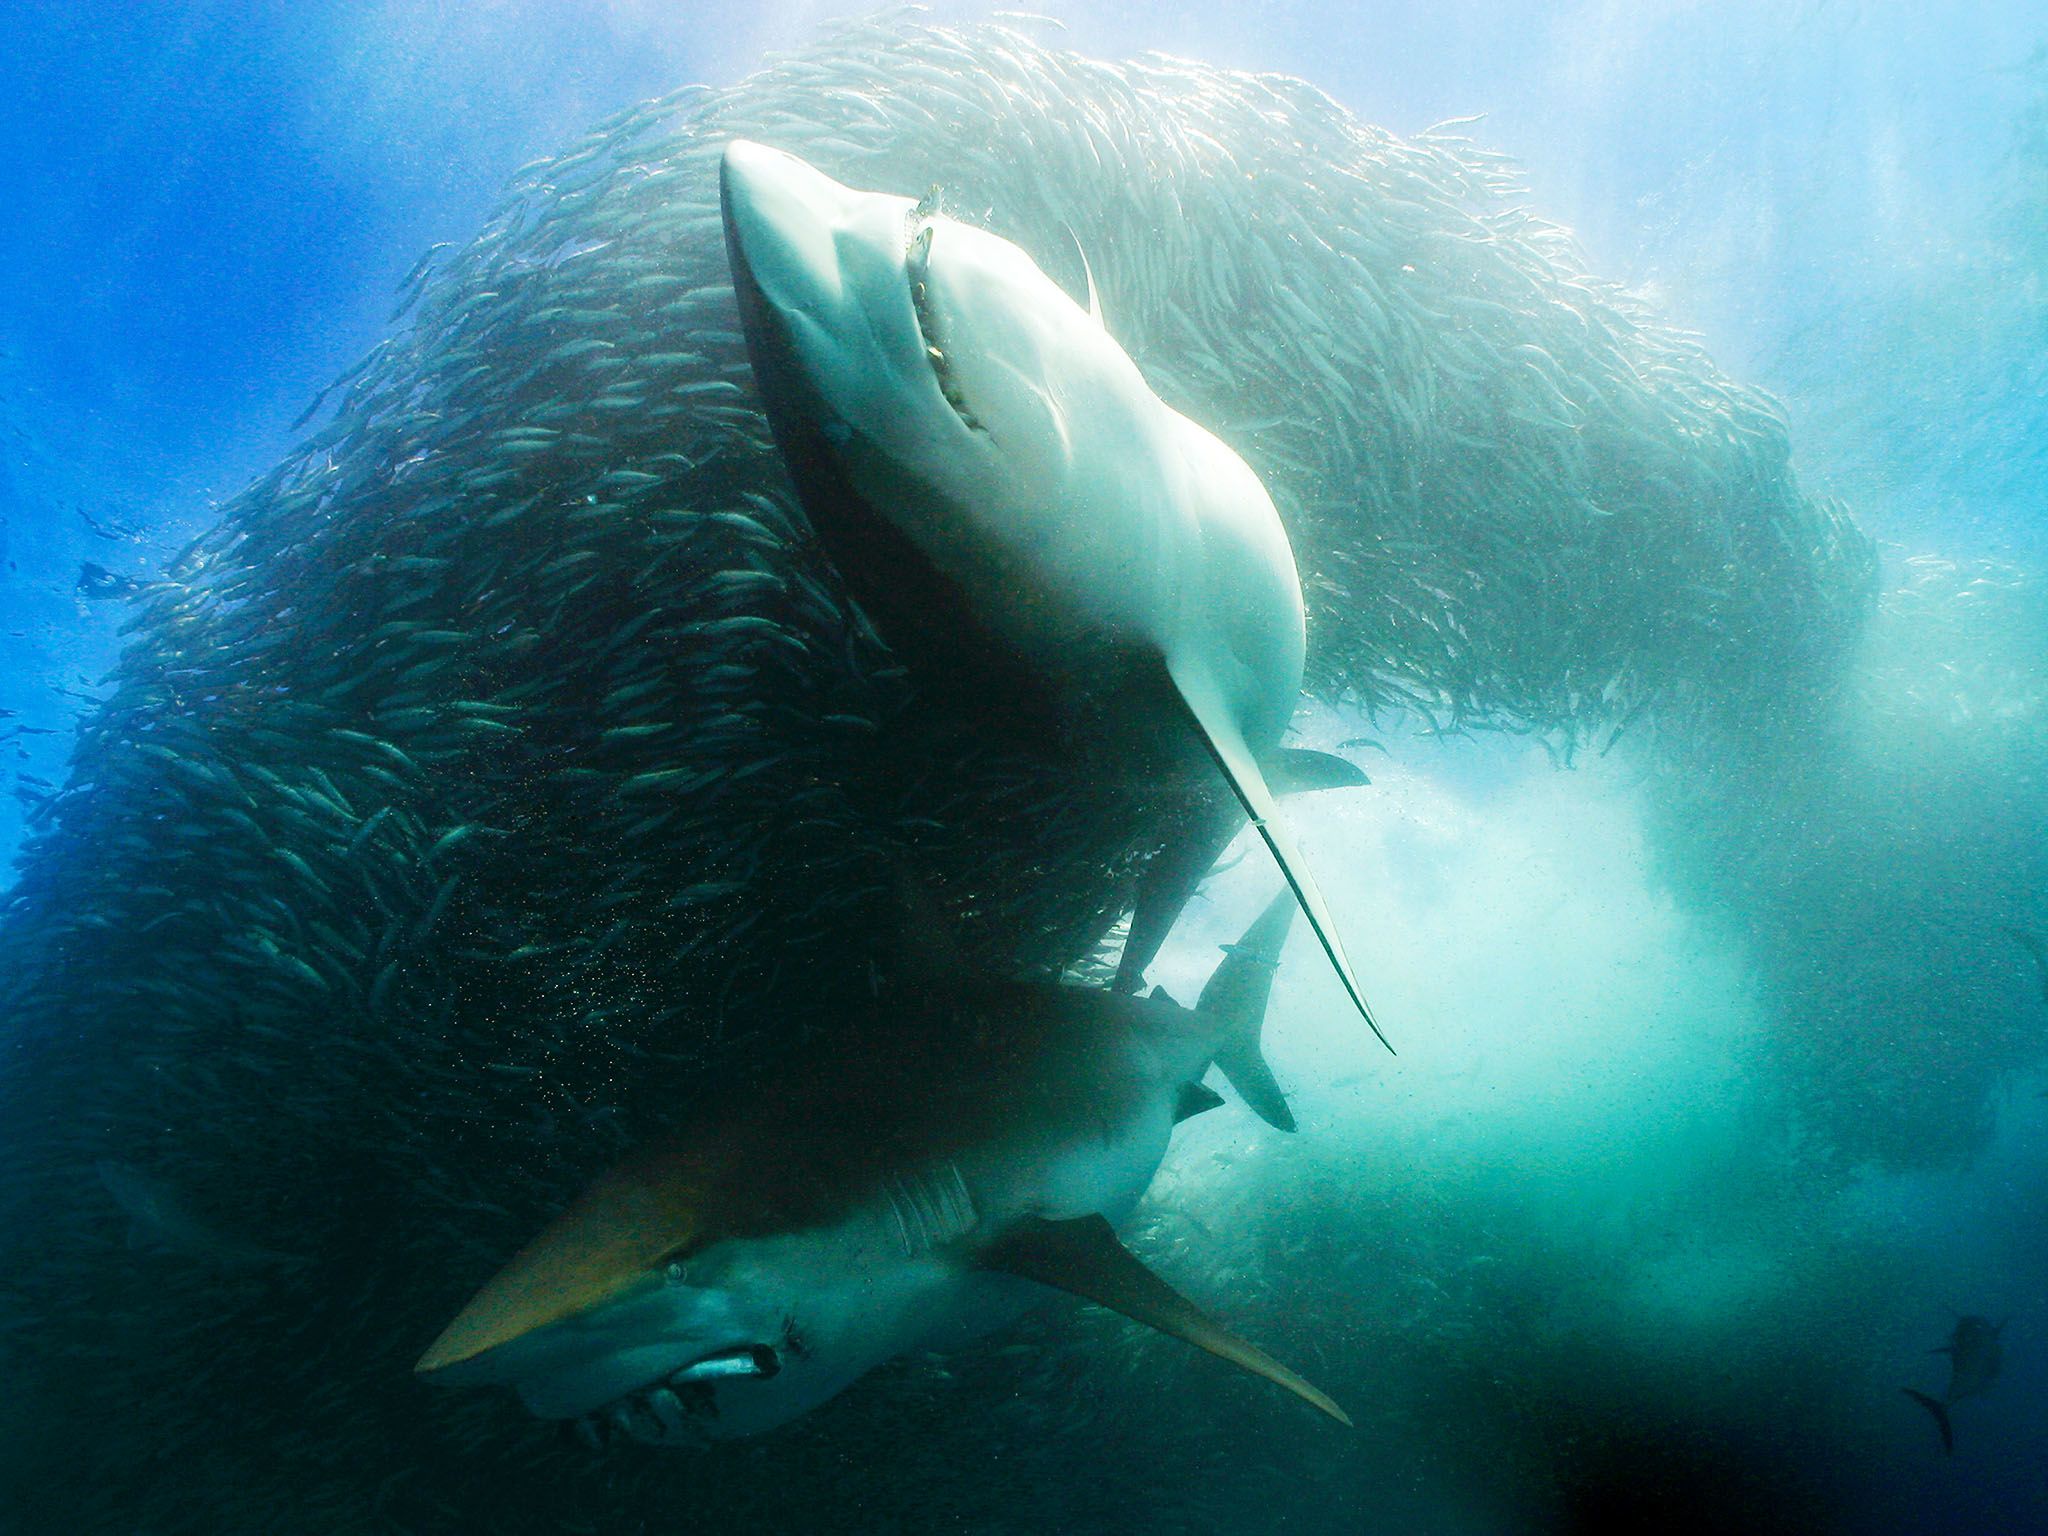 South Africa: Underwater scene of two Great White sharks with sardines in their mouths circling... [Photo of the day - August 2015]